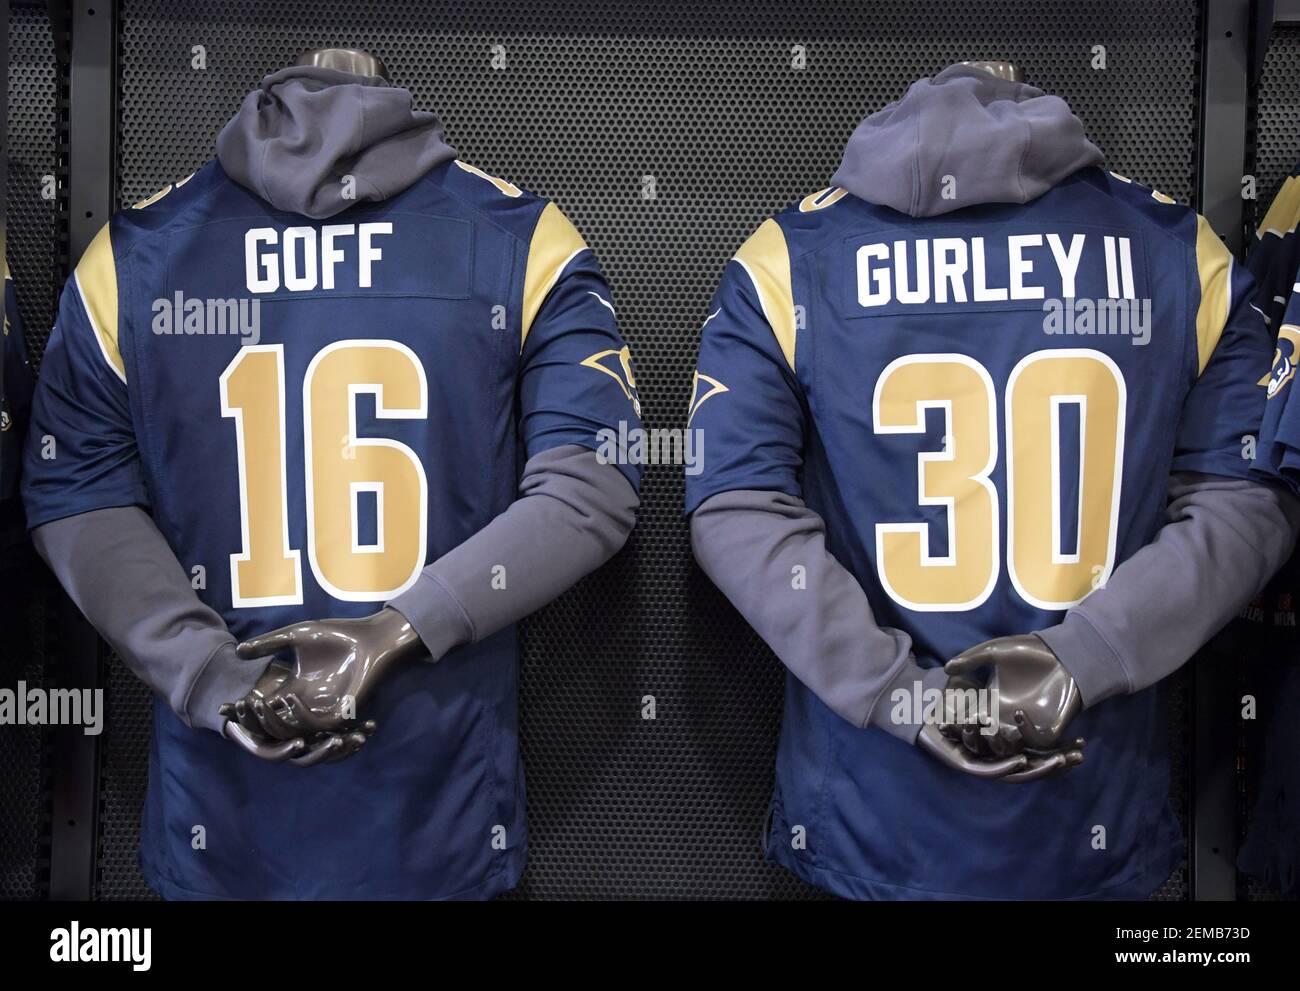 Jan 29, 2019; Atlanta, GA, USA; Nike jerseys of Los Angeles Rams  quarterback Jared Goff (not pictured) and running back Todd Gurley (not  pictured) on display at the NFL Shop at the